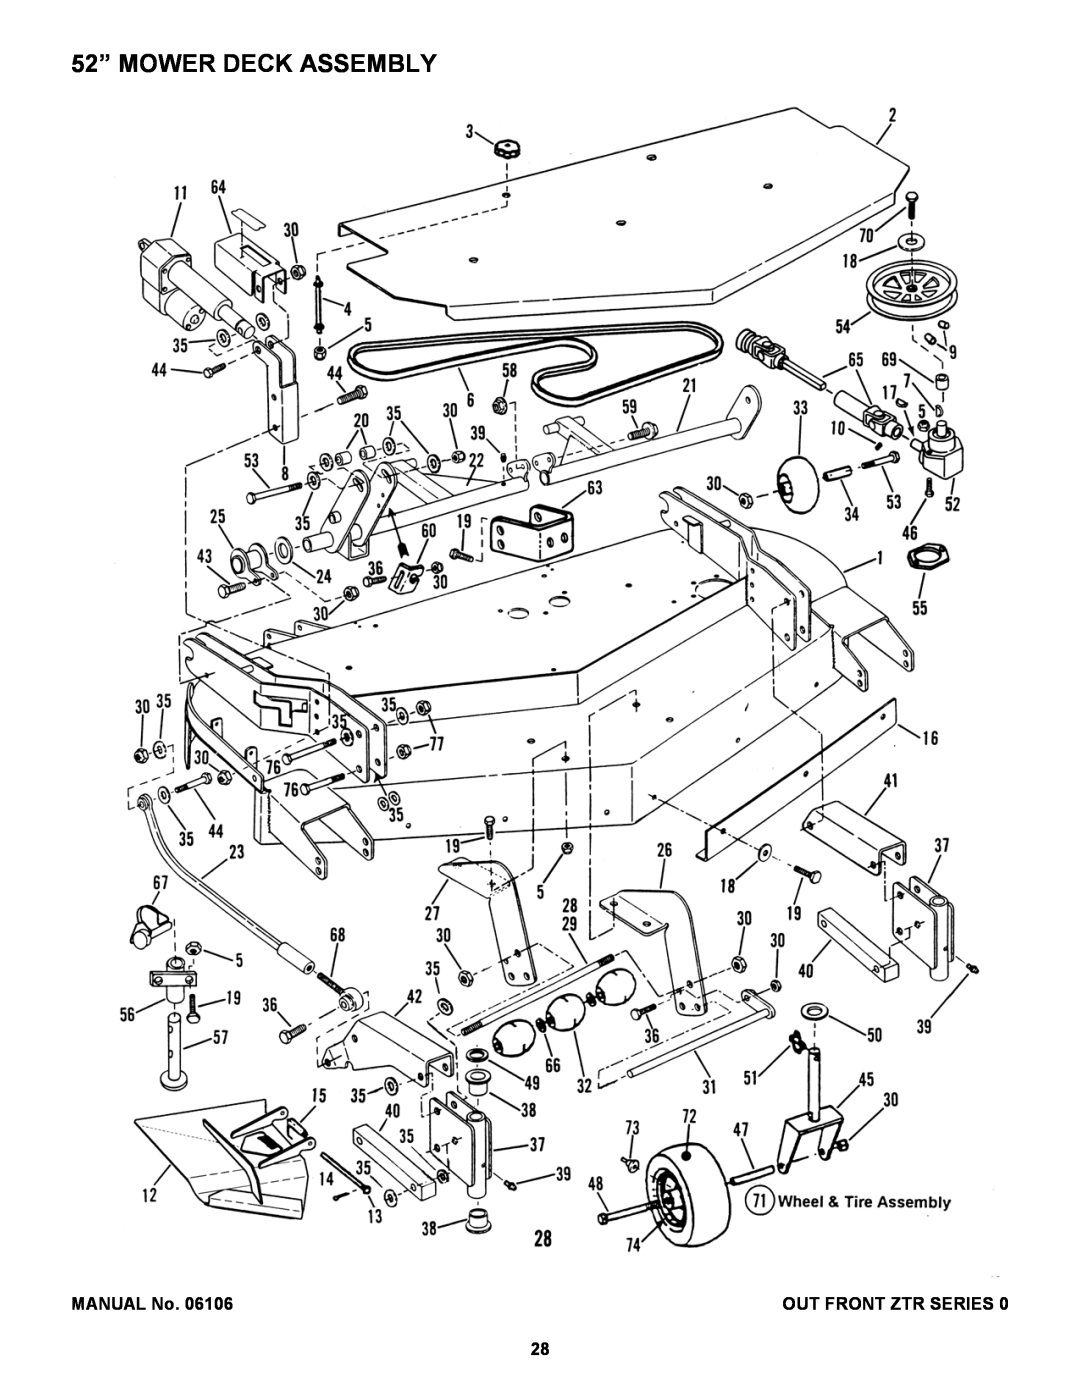 Snapper ZF2500KH, ZF2200K manual 52” MOWER DECK ASSEMBLY, MANUAL No, Out Front Ztr Series 